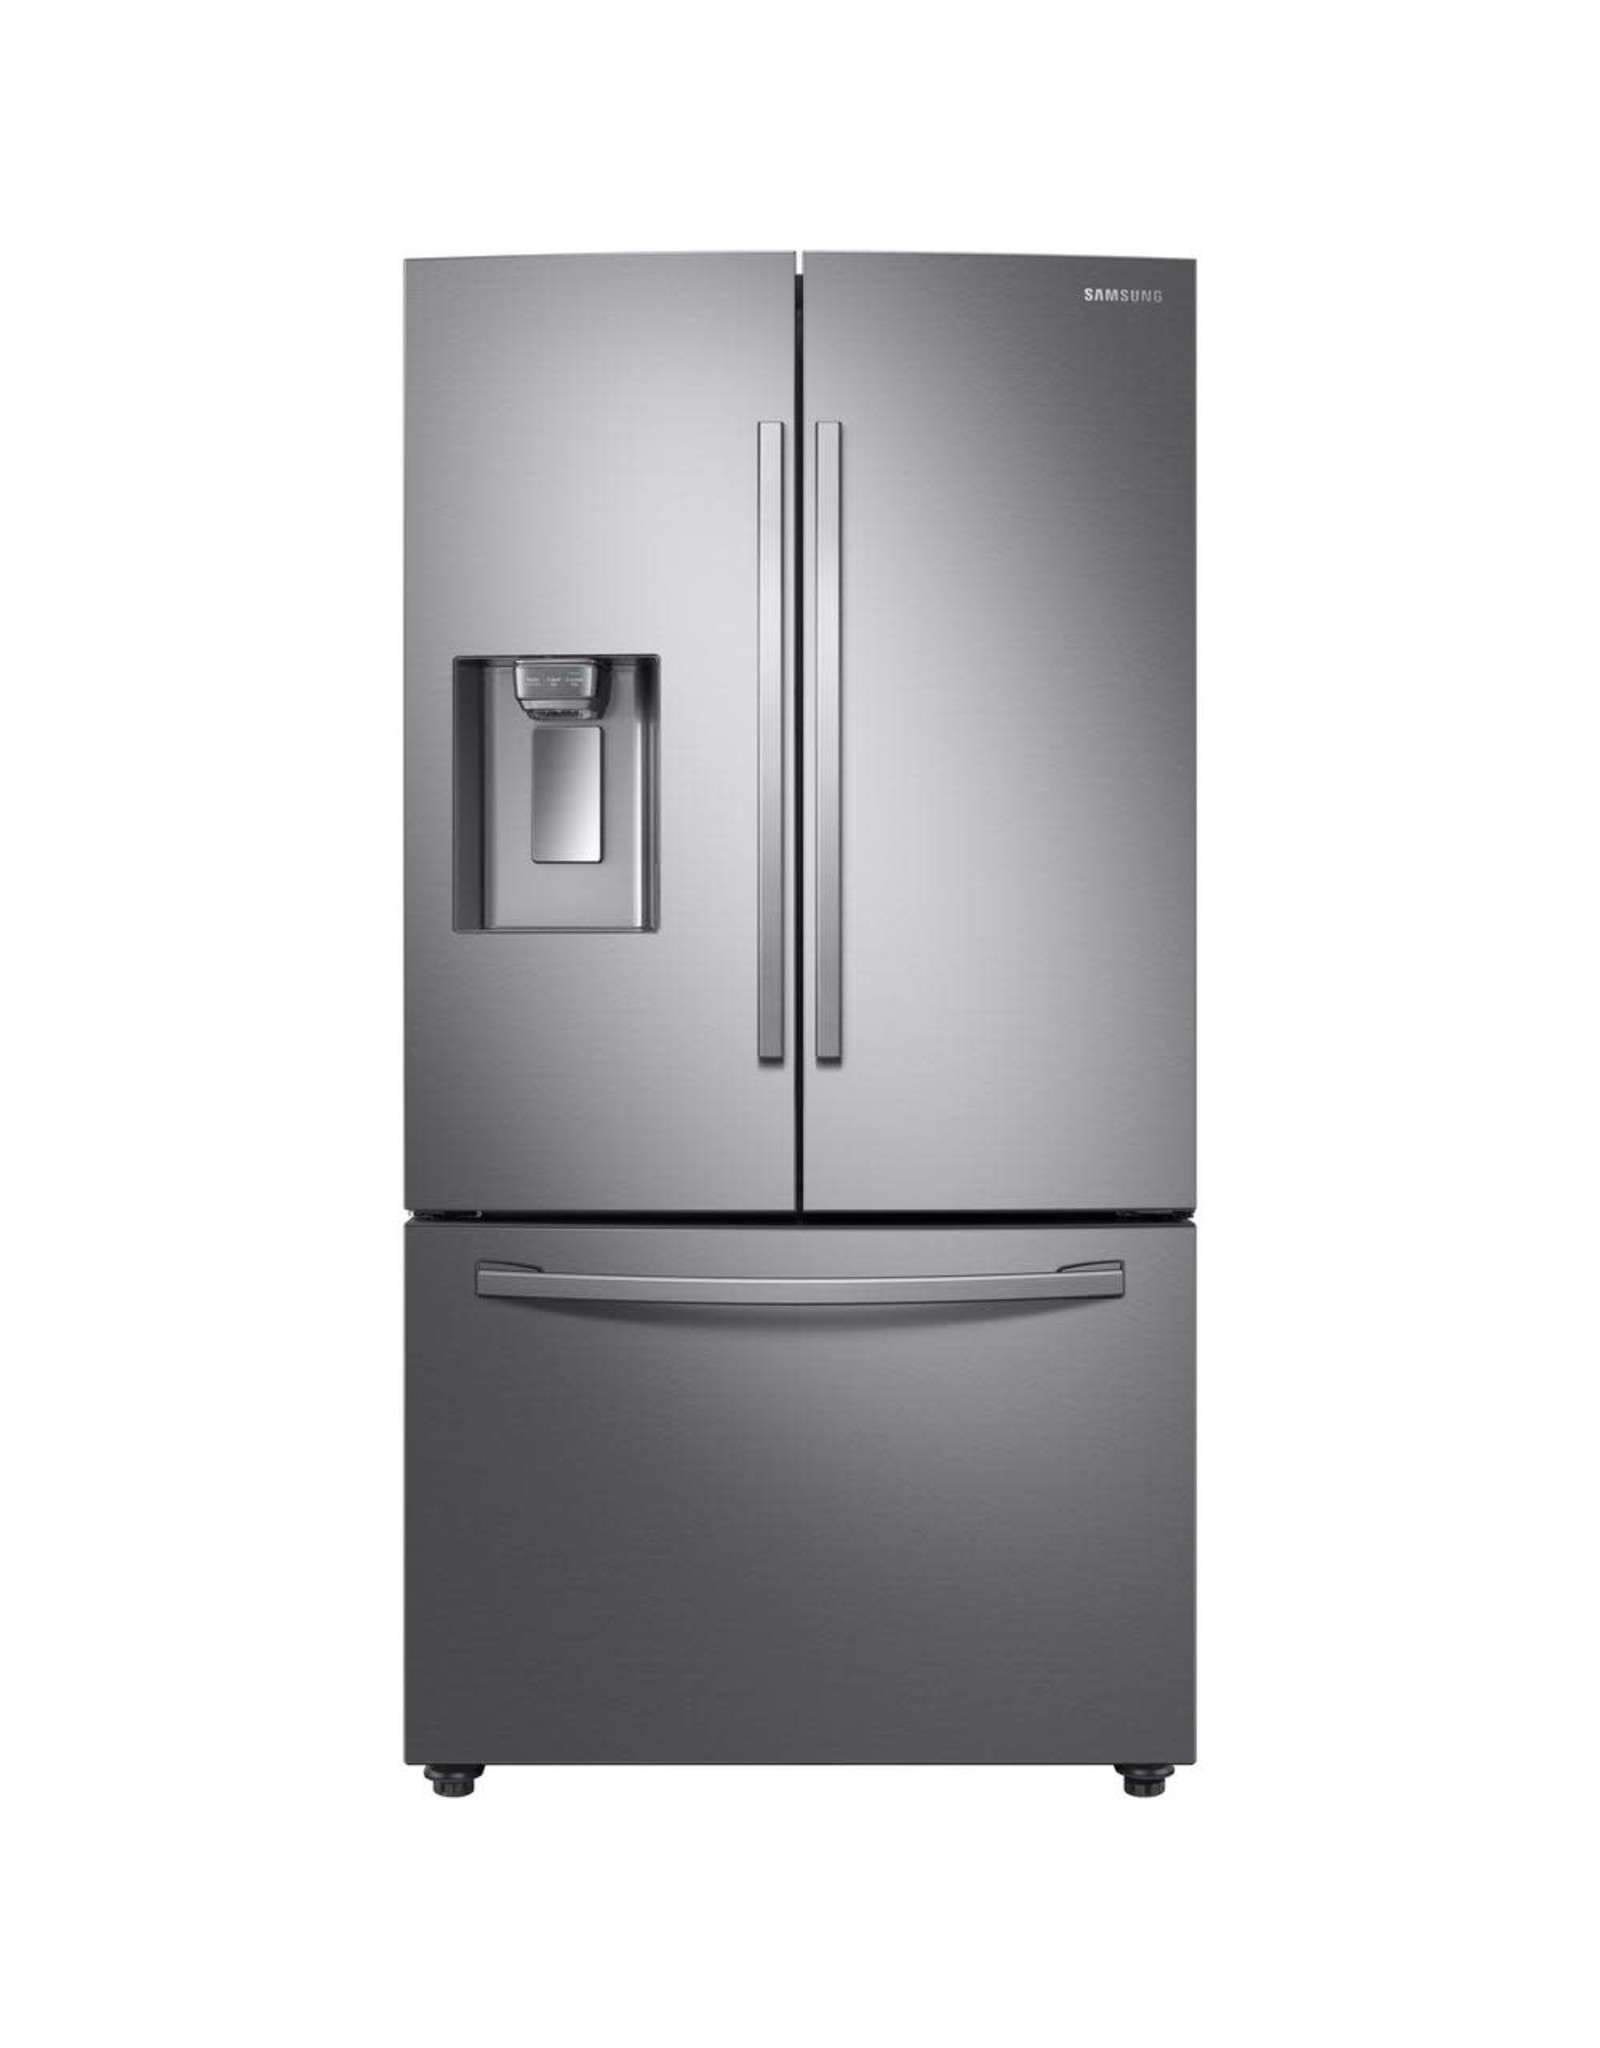 SAMSUNG RF23R6201SR 23 cu. ft. 3-Door French Door Refrigerator in Stainless Steel with CoolSelect Pantry, Counter Depth